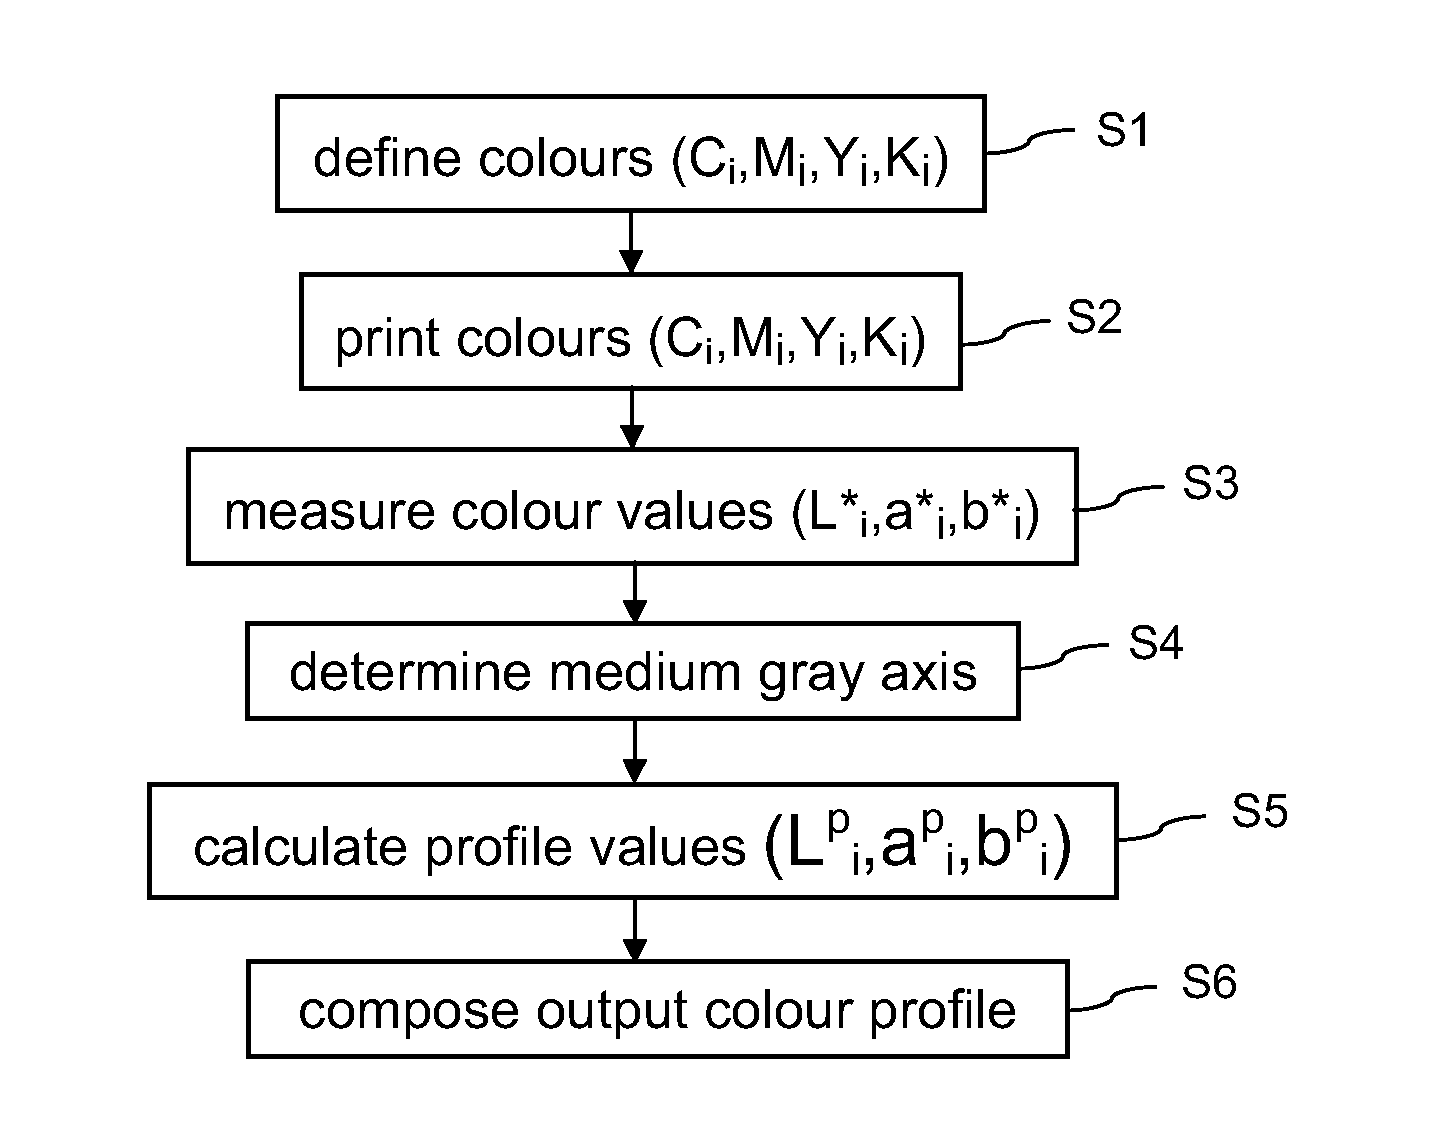 Output profile for colour reproduction system